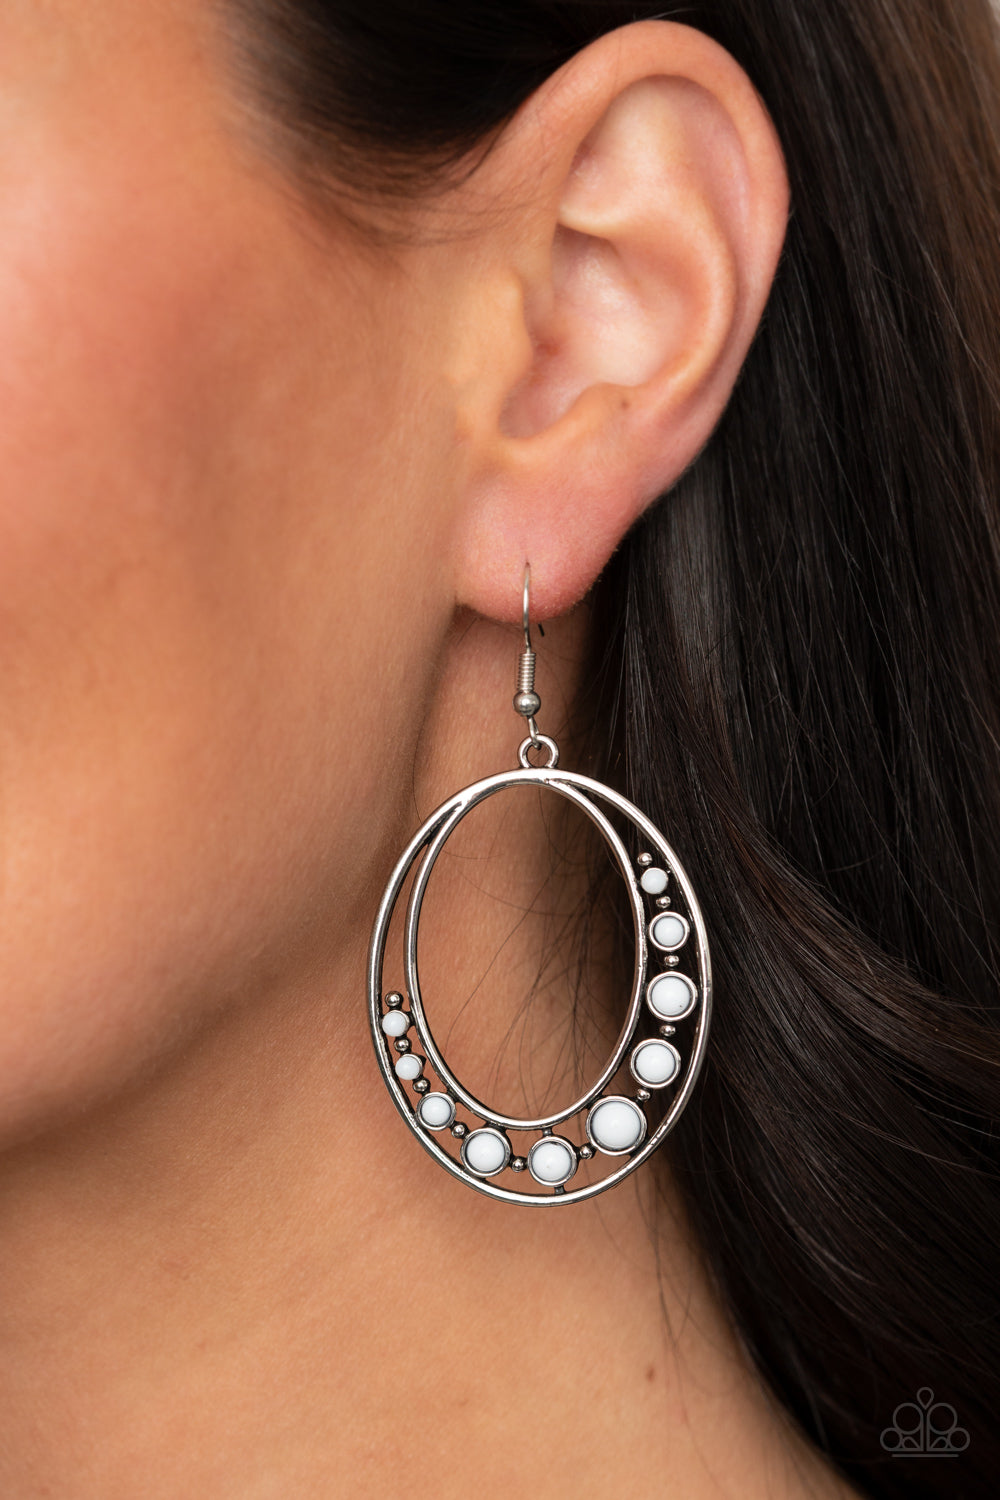 Crescent Cove- White and Silver Earrings- Paparazzi Accessories